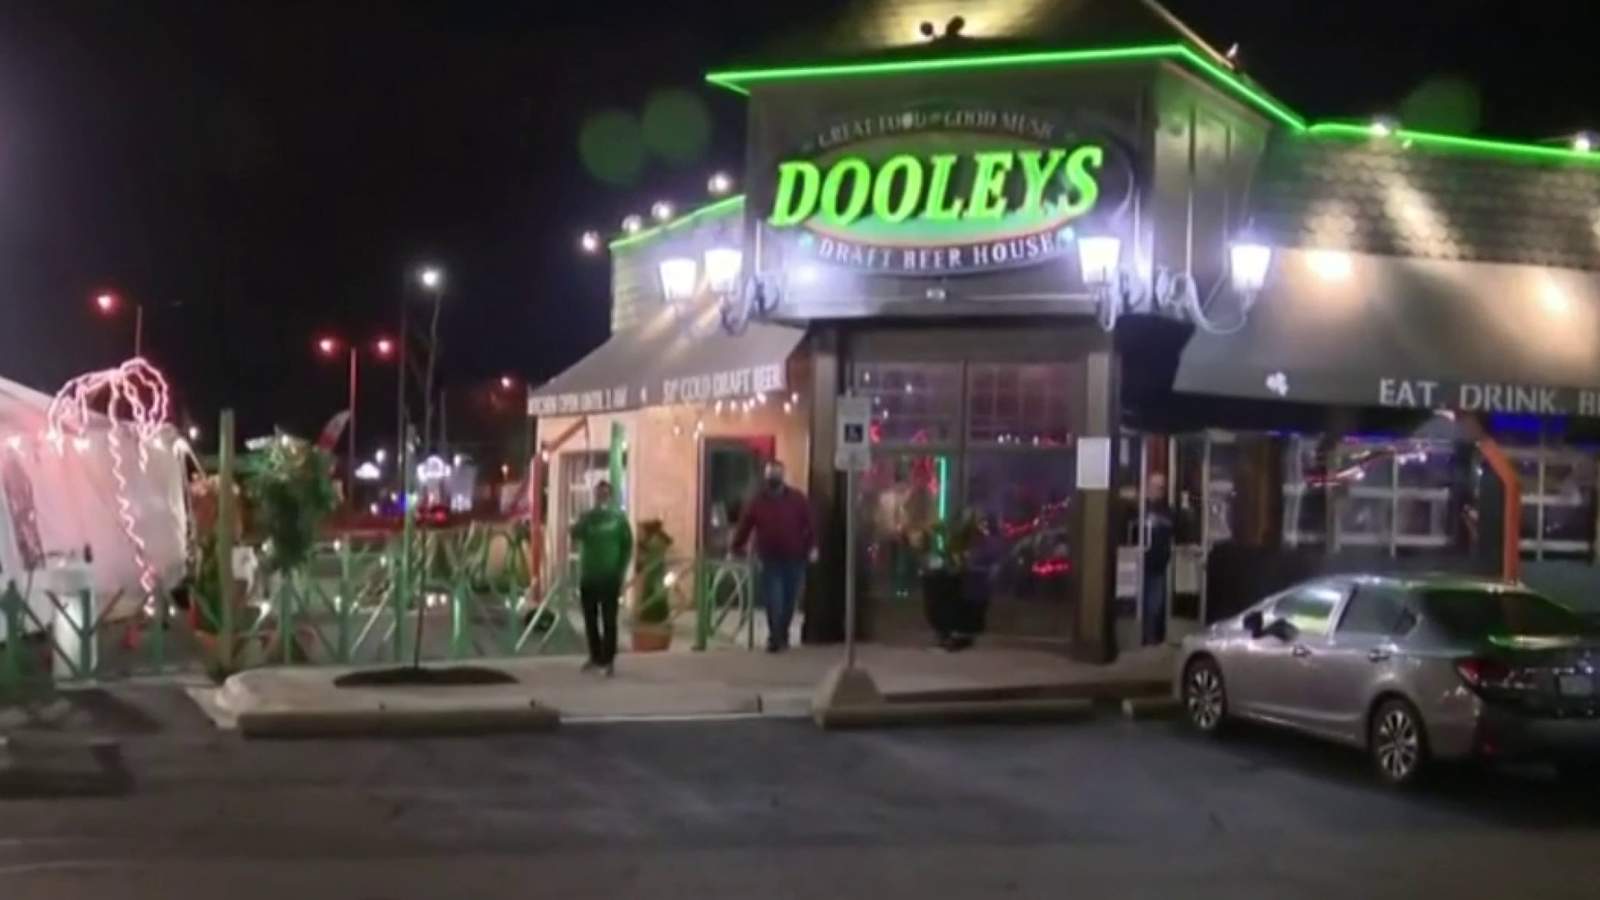 Dooley’s bar in Roseville holds party ahead of COVID shutdown